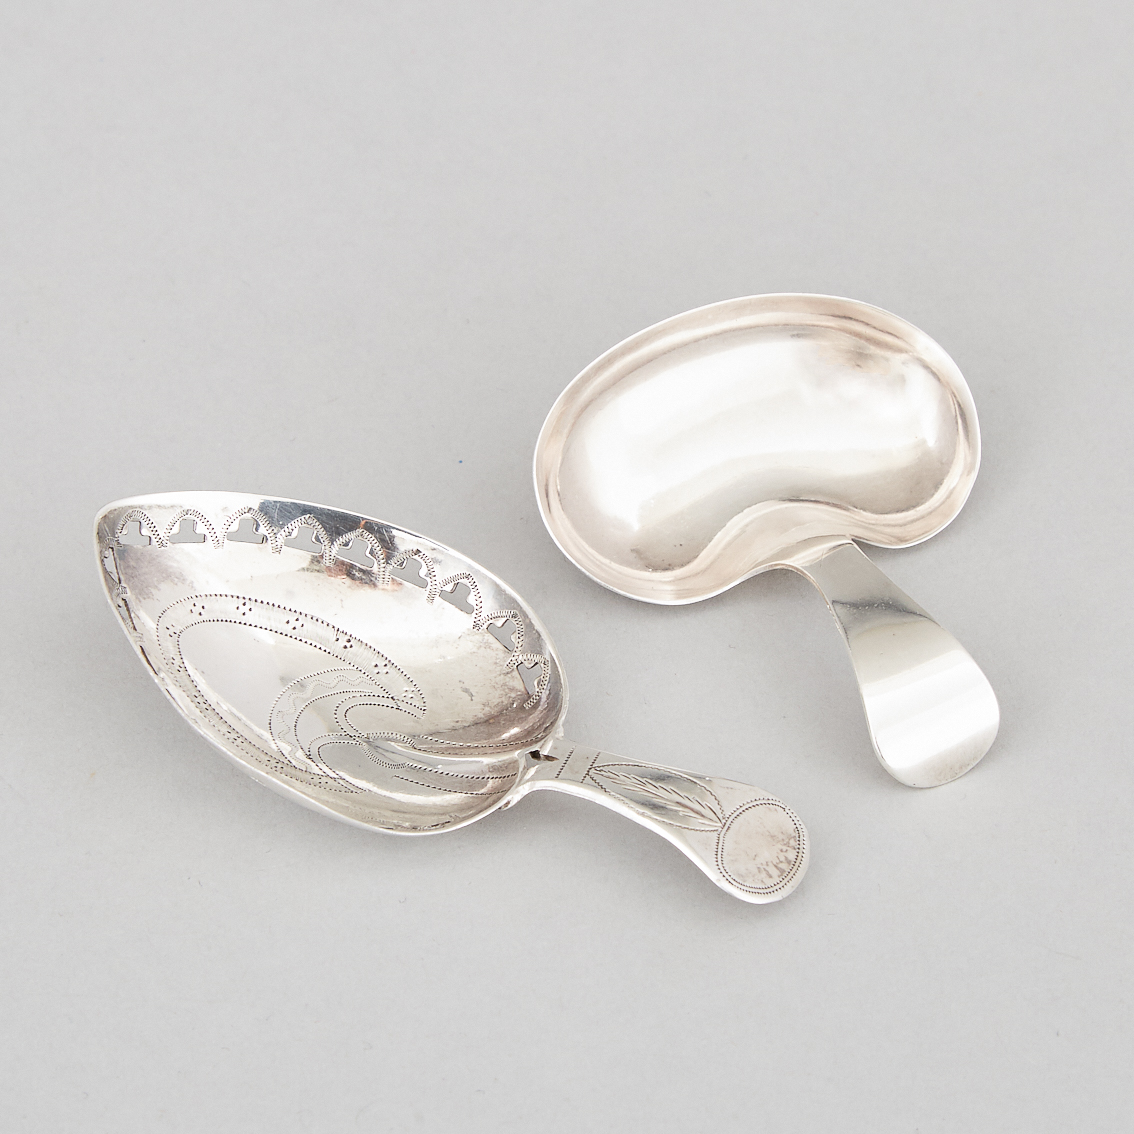 Two George III Silver Heart or Kidney Shaped Caddy Spoons, Joseph Taylor and Cocks & Bettridge, Birmingham, 1807/10